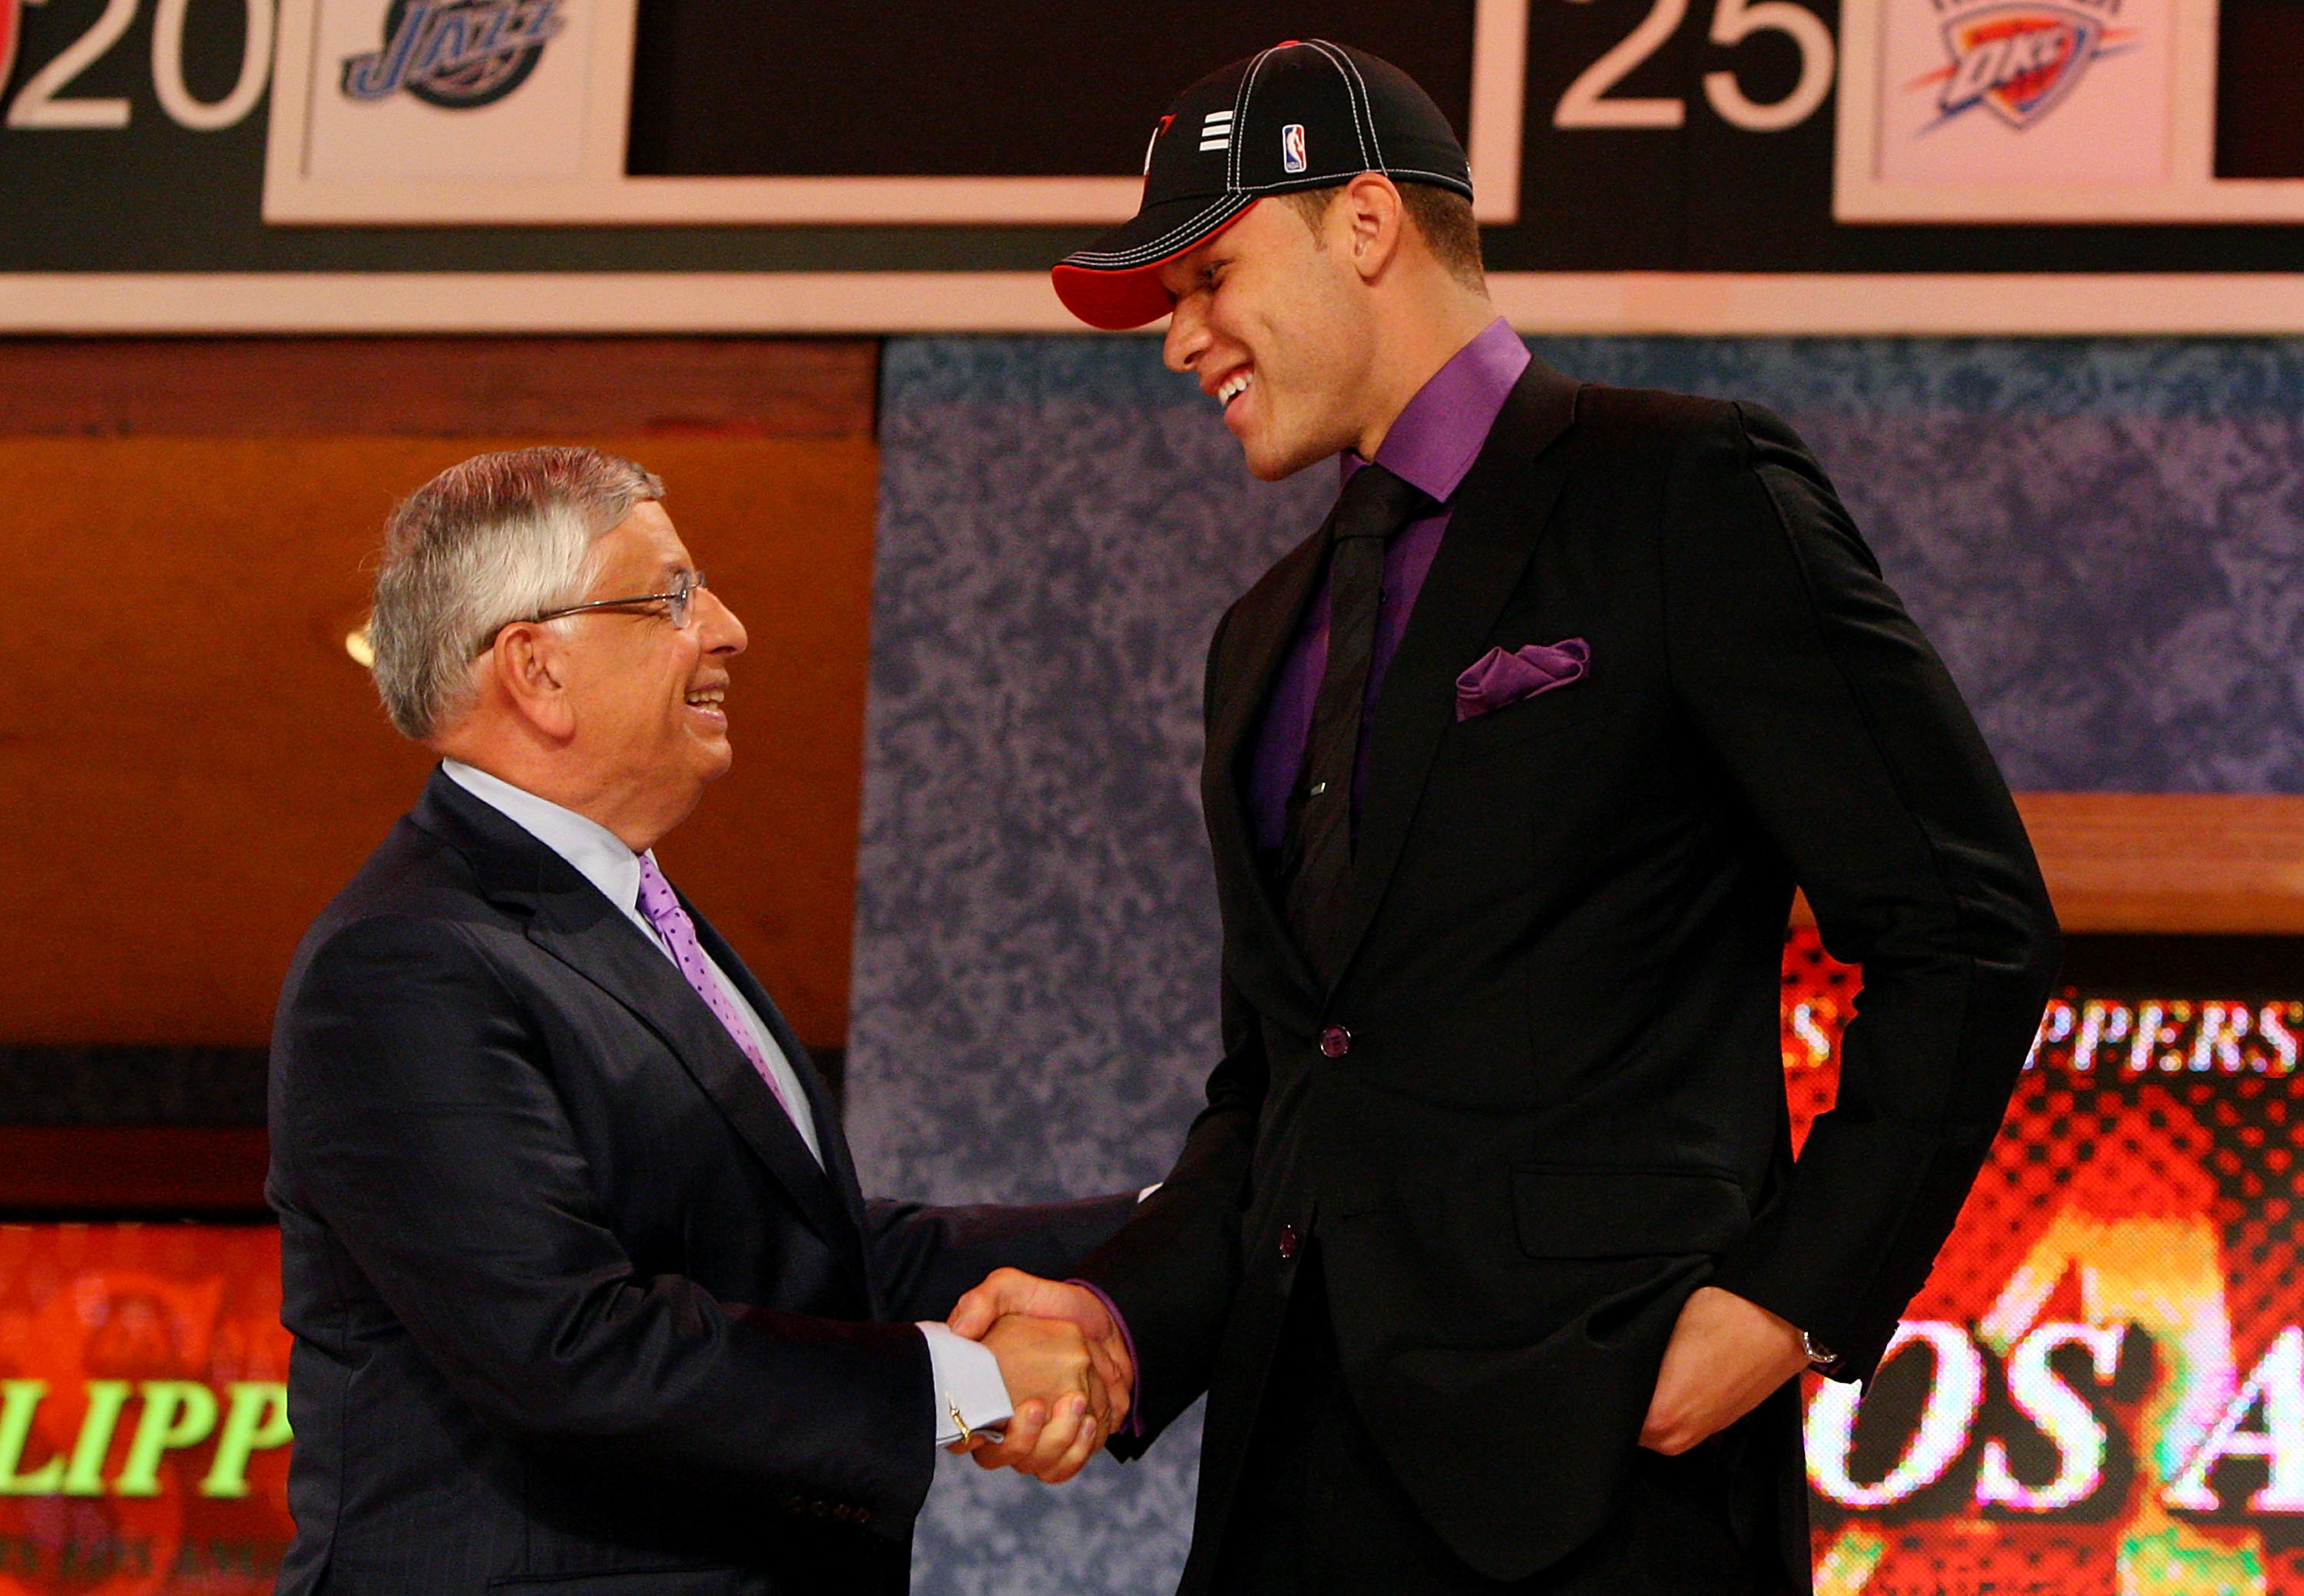 NEW YORK - JUNE 25:  NBA Commissioner David Stern poses for a photograph with the first overall draft pick by the Los Angeles Clippers,  Blake Griffin during the 2009 NBA Draft at the Wamu Theatre at Madison Square Garden June 25, 2009 in New York City. N